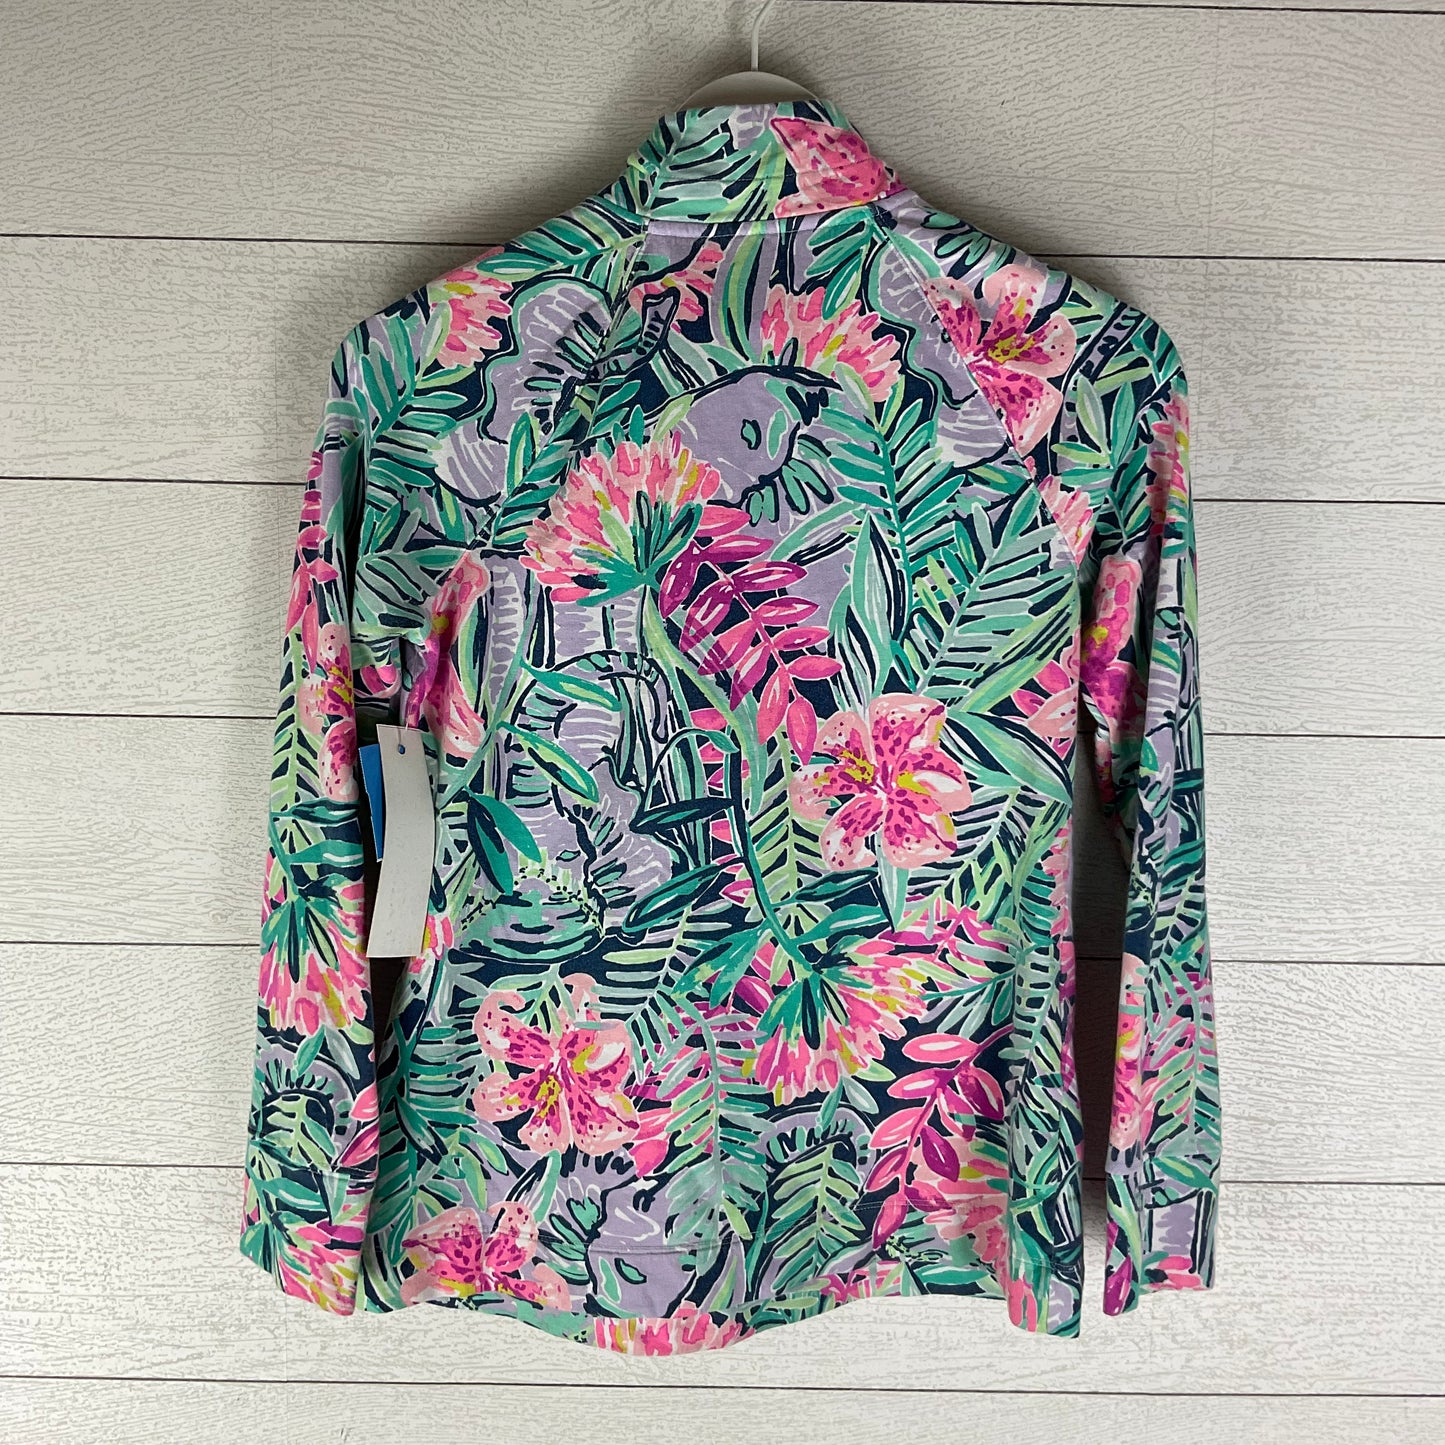 Jacket Designer By Lilly Pulitzer  Size: Xs